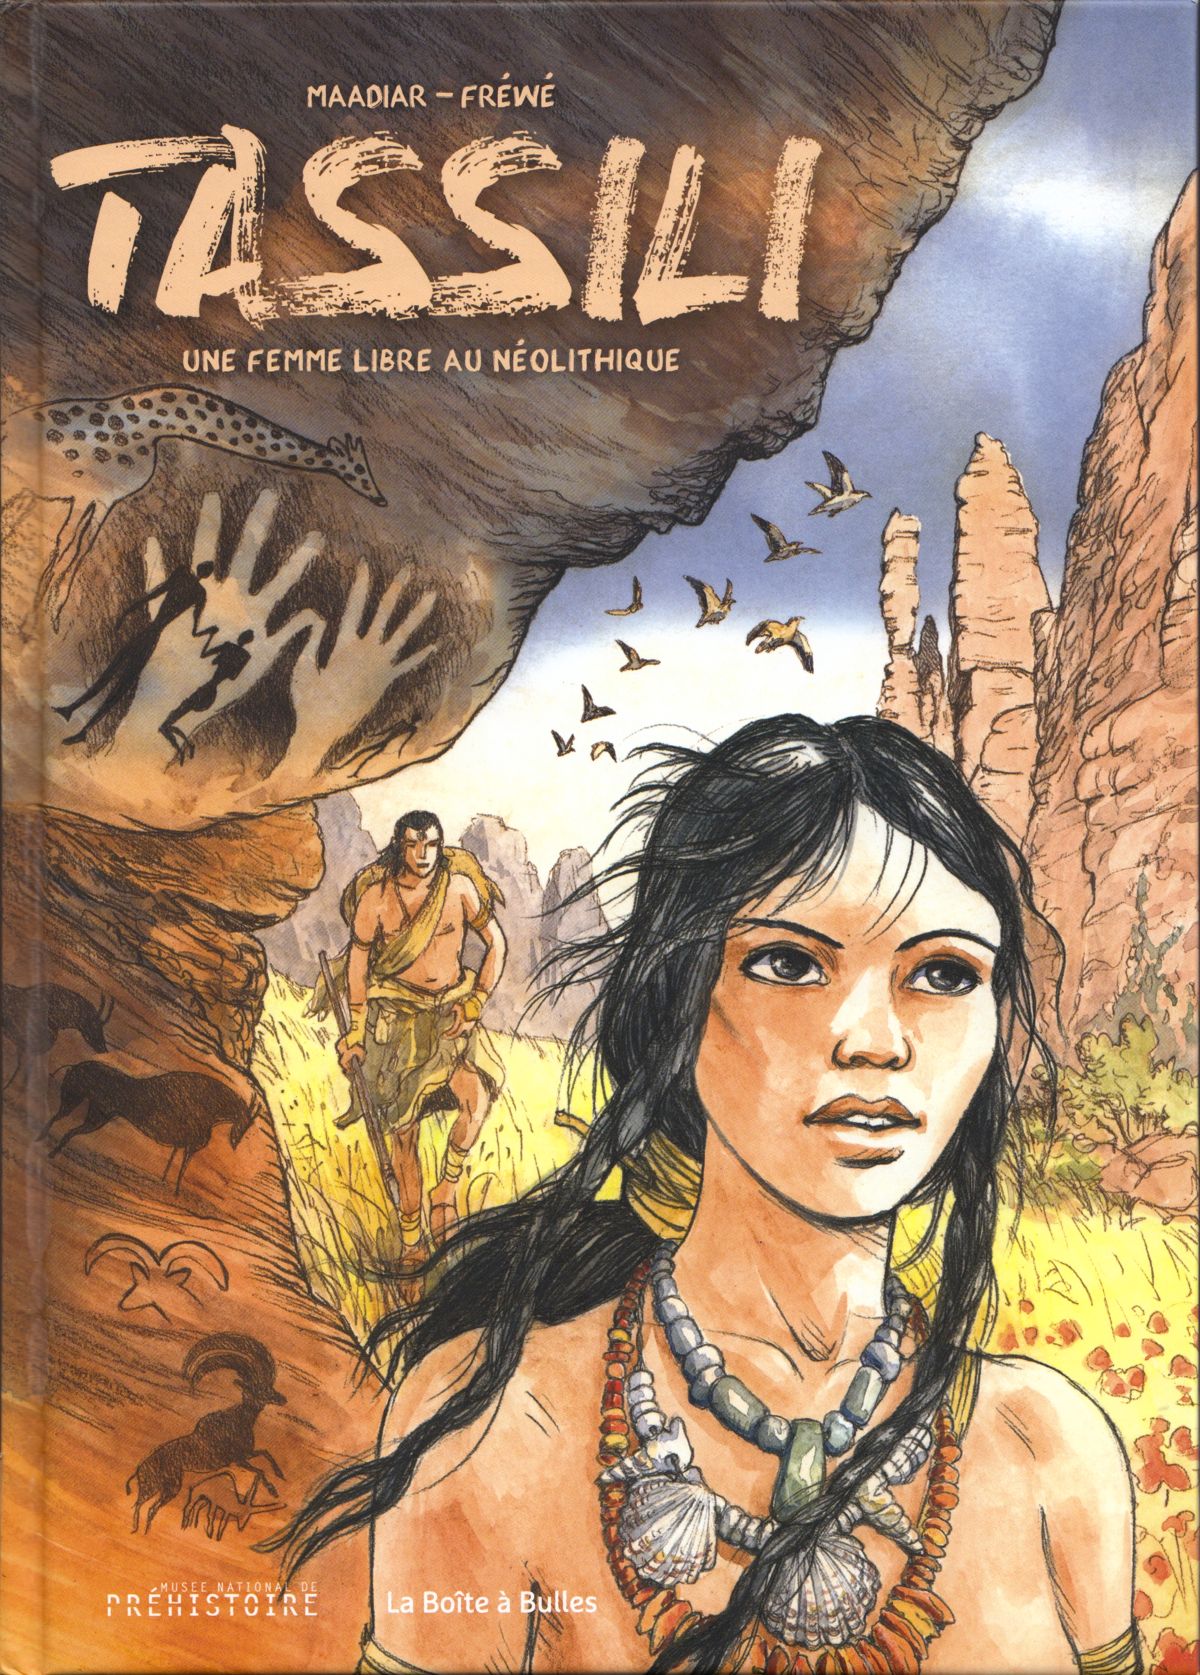 Front cover of the comic book « Tassili, une femme libre au Néolithique » by Maadiar and Fréwé, “premiered” at the Musée national de Préhistoire in Les Eyzies, on the occasion of the lecture given by the researcher Jean-Loïc Le Quellec.